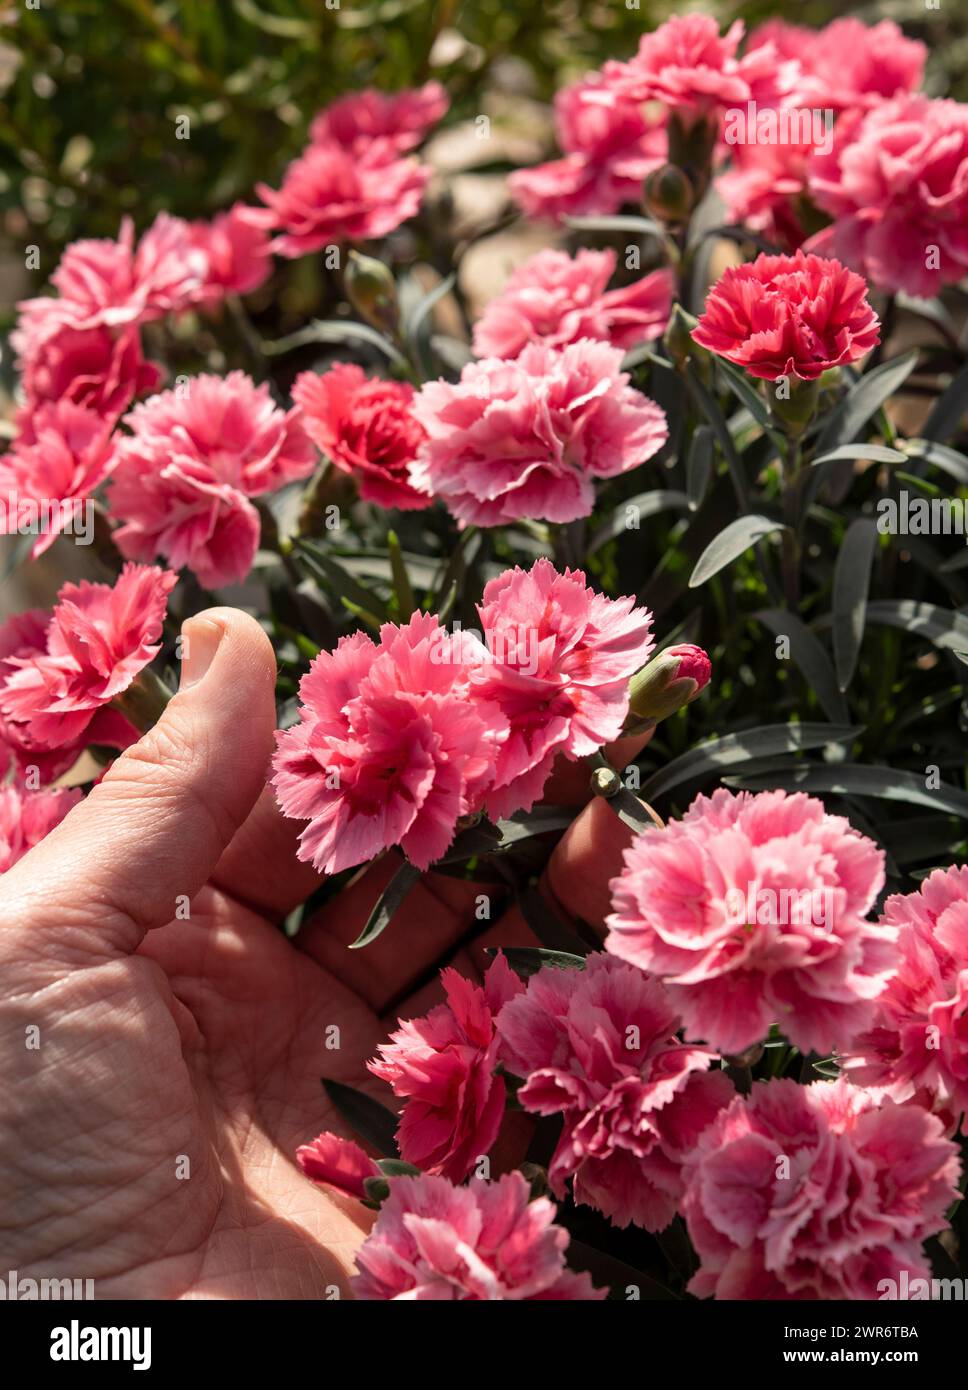 Dianthus gratianopolitanus, commonly known as the Cheddar pink or clove pink Stock Photo